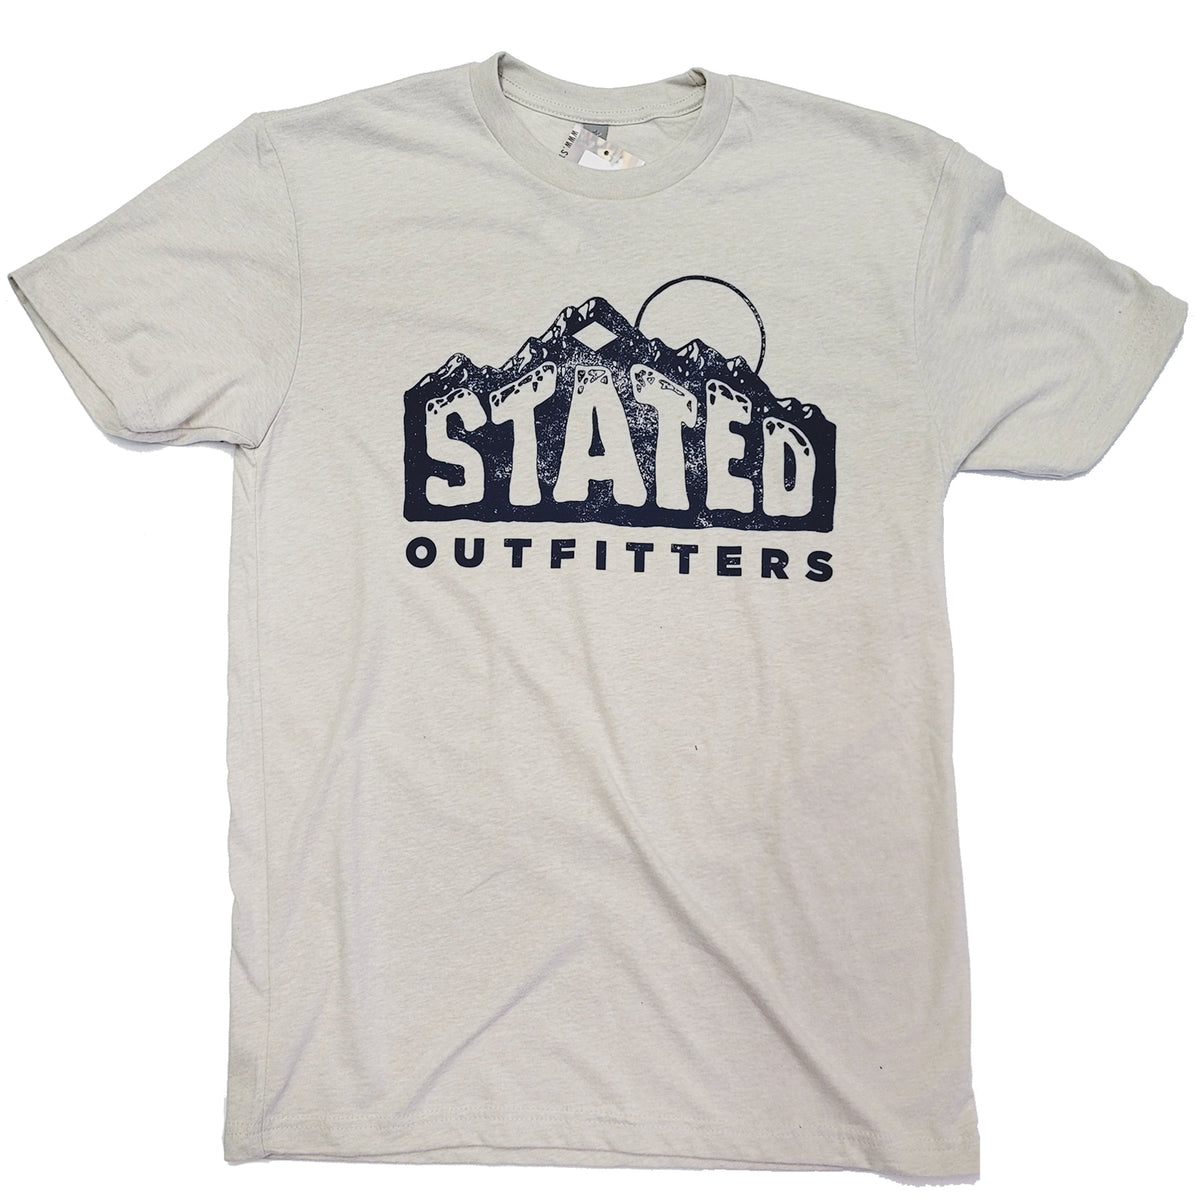 Stated Outfitters Rockies Tee